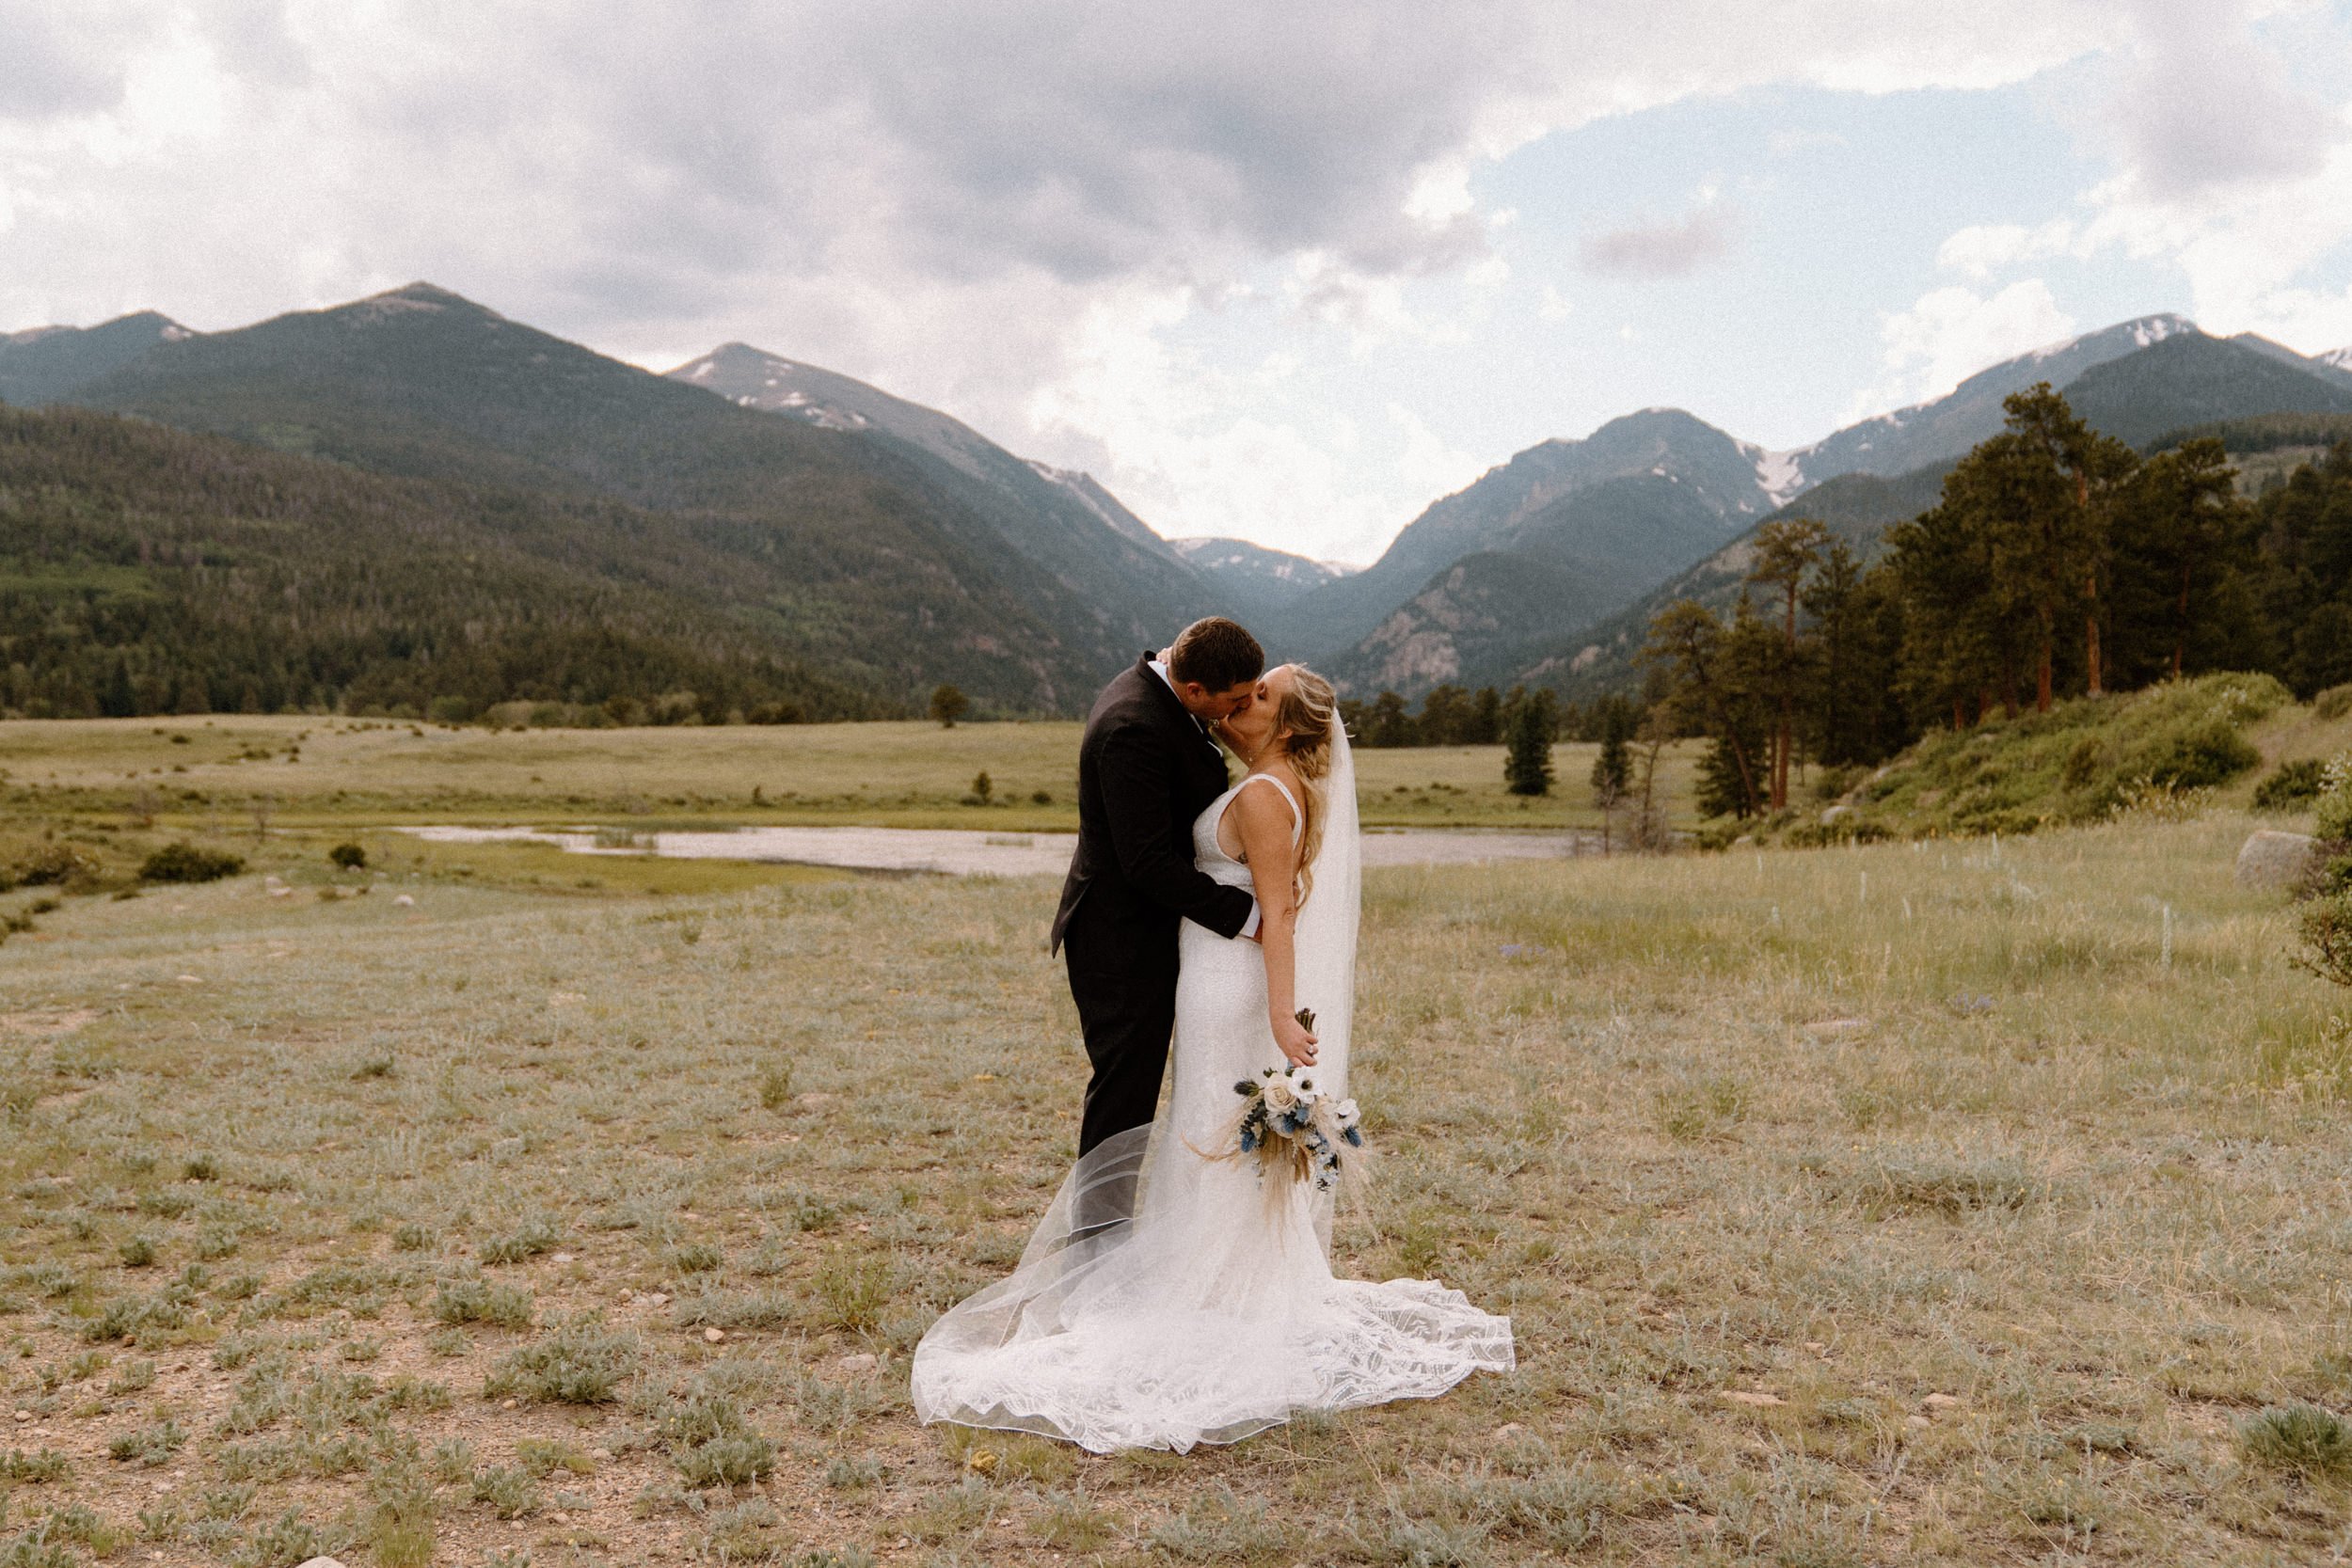 The bride and groom kiss in a mountain meadow in Estes Park, CO